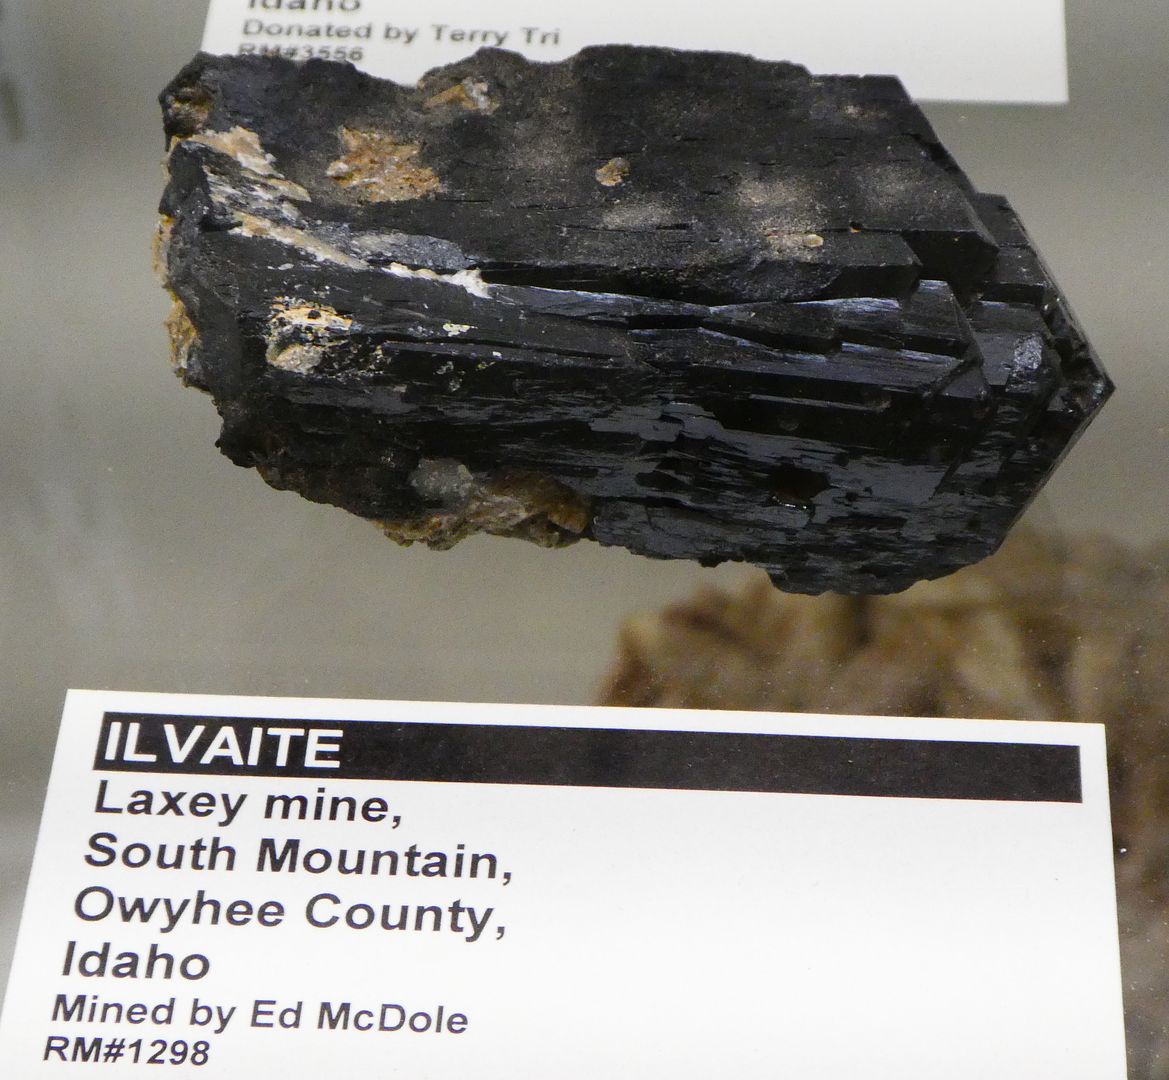 Northwest Mineral Gallery: Some Idaho Minerals (Photo Diary)